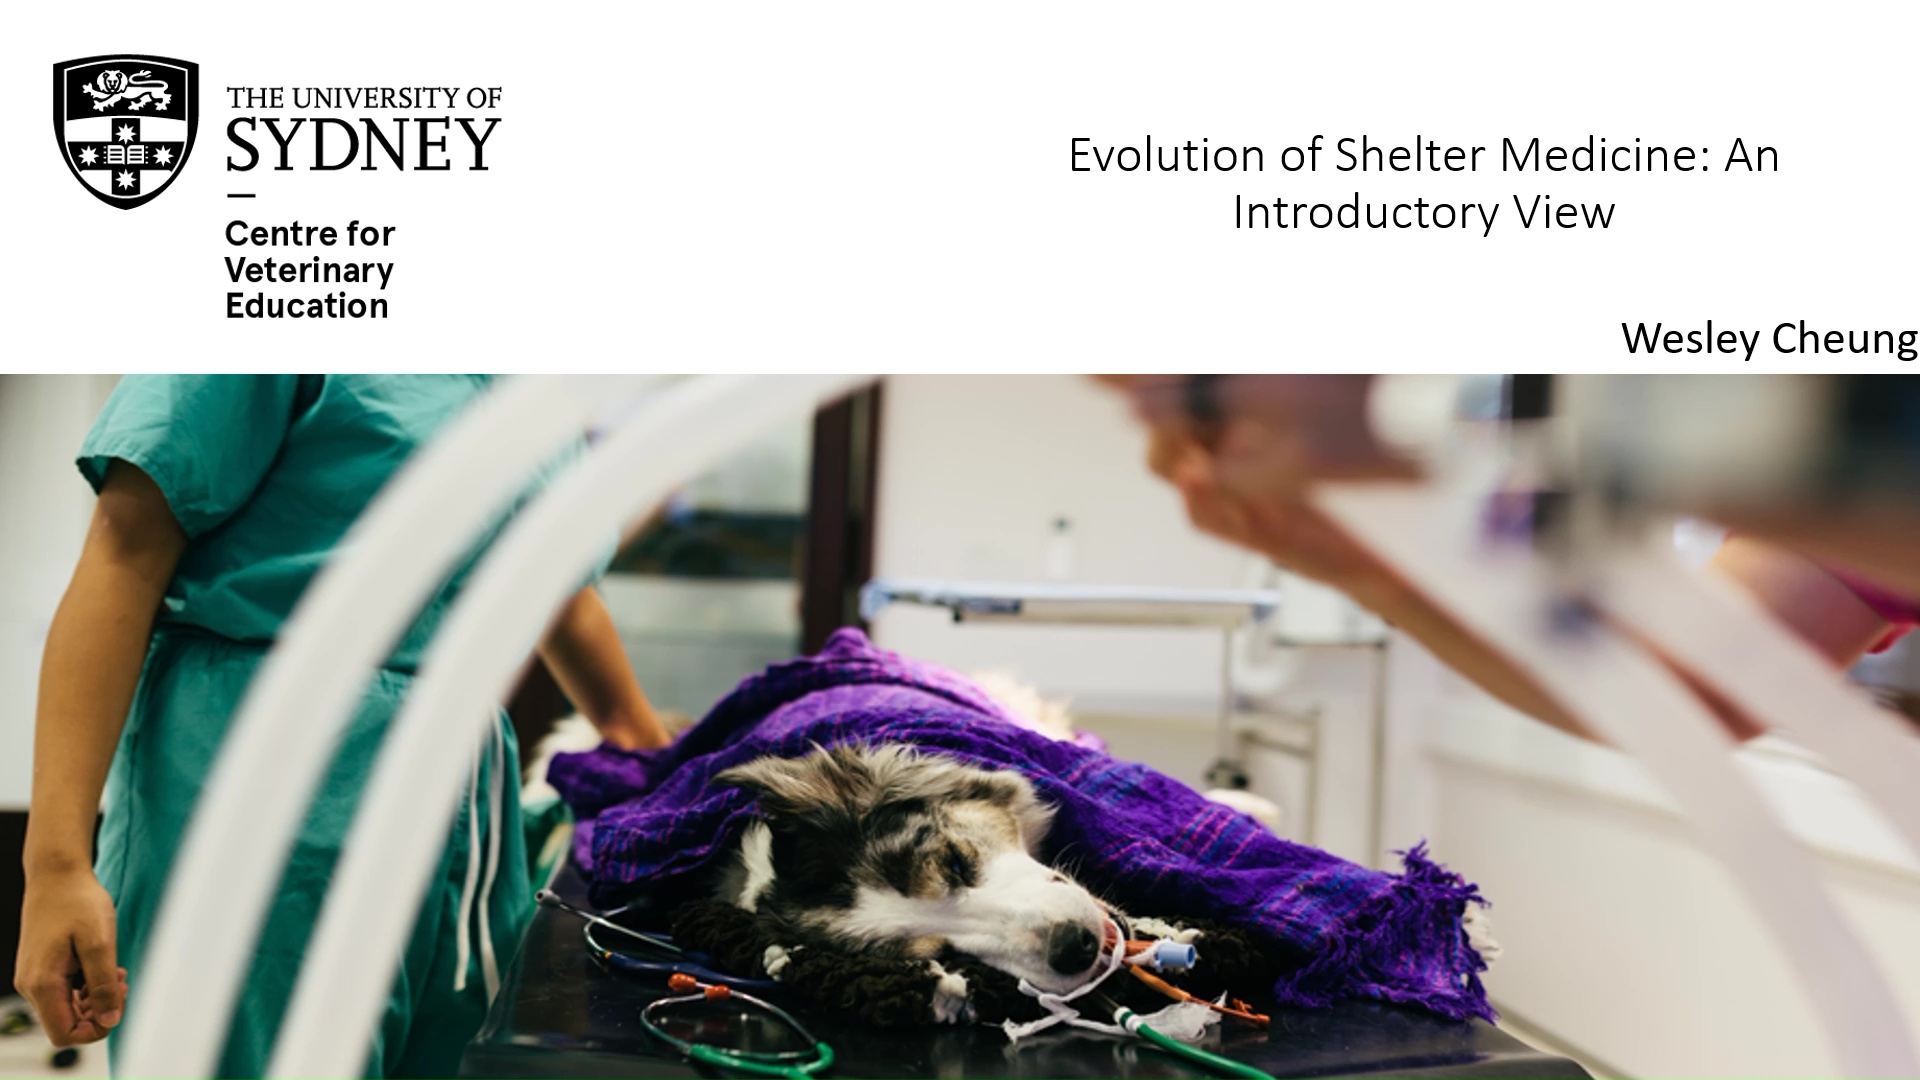 Evolution of Shelter Medicine: An Introductory View